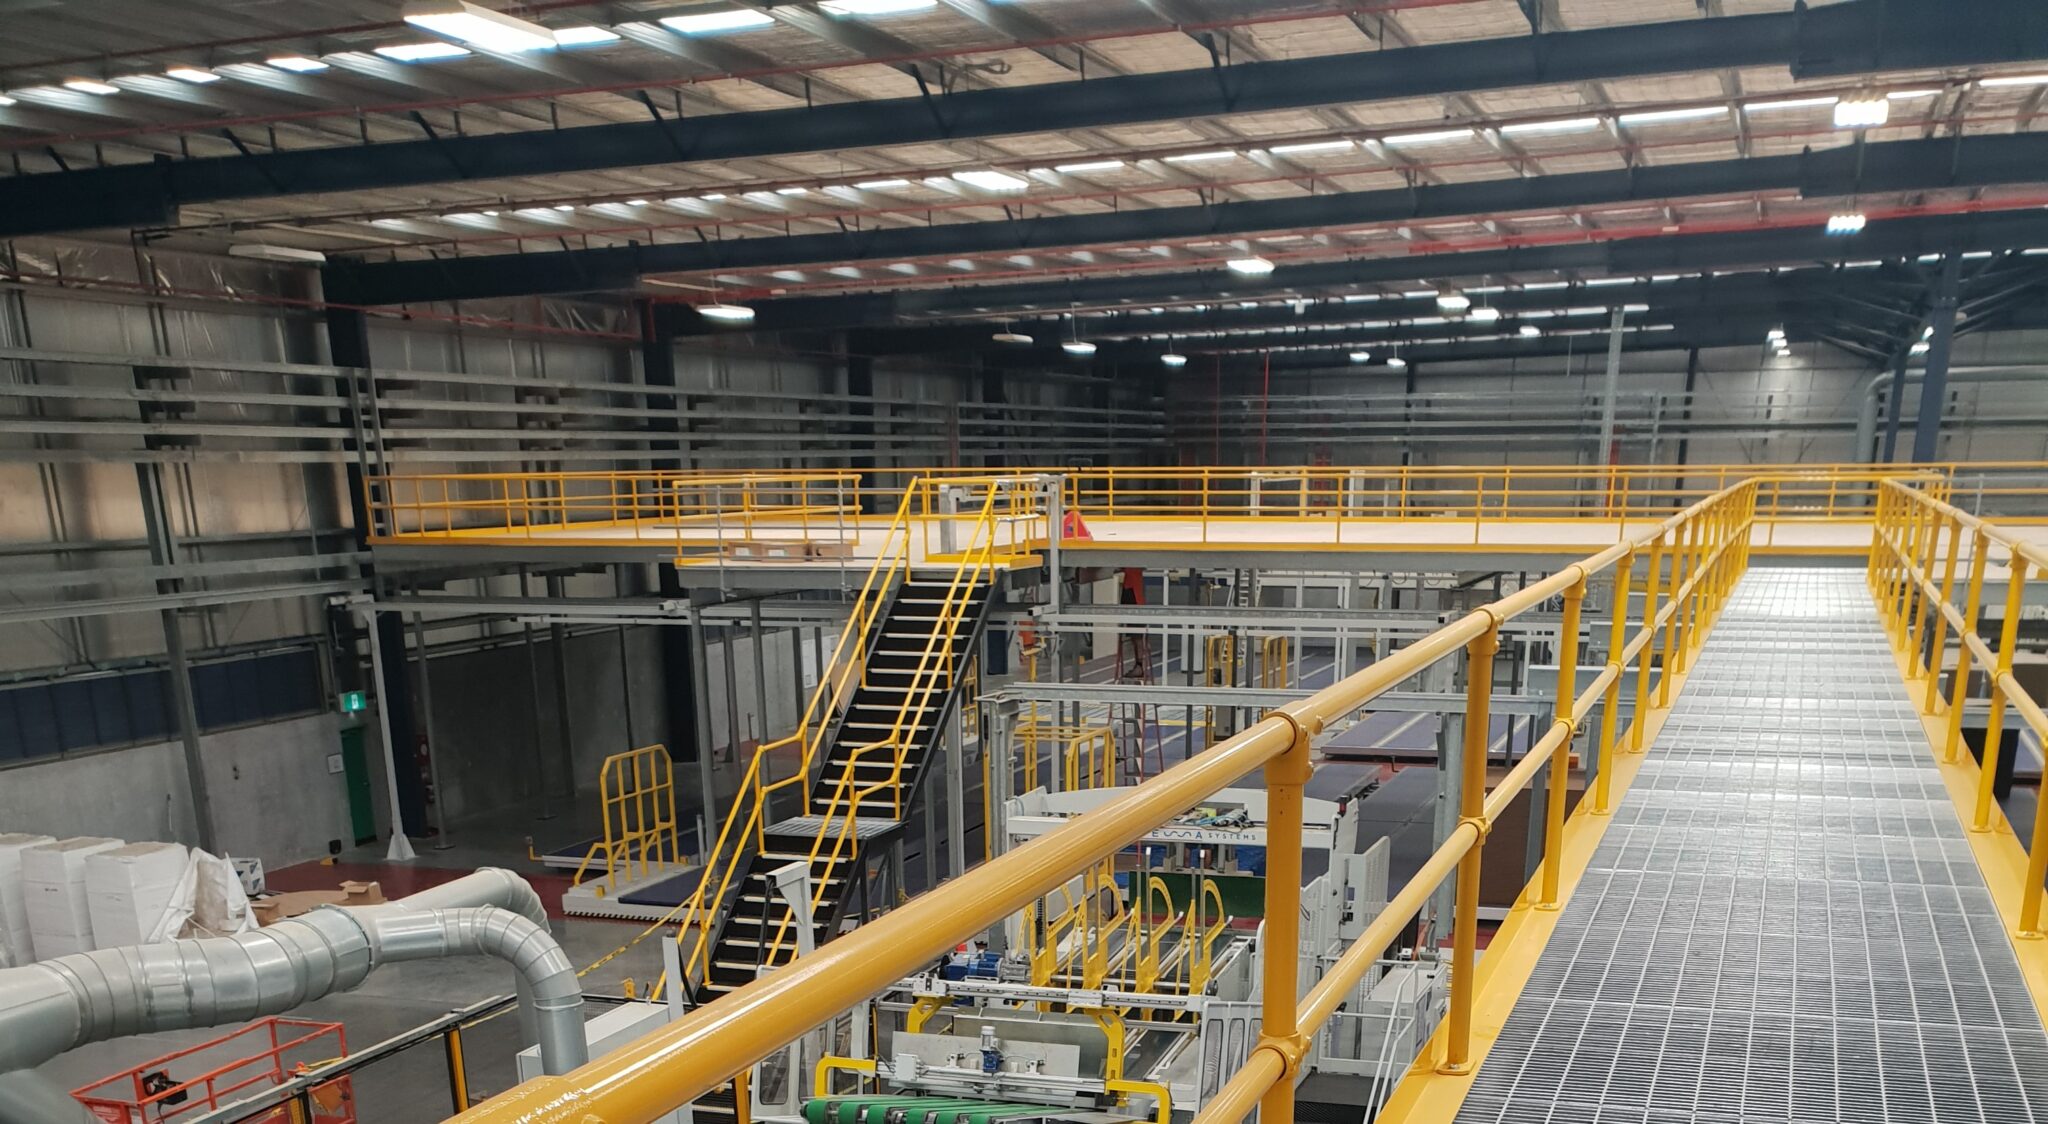 Plant facility upgrades project for OJI Fibre Solutions Company by Heighton